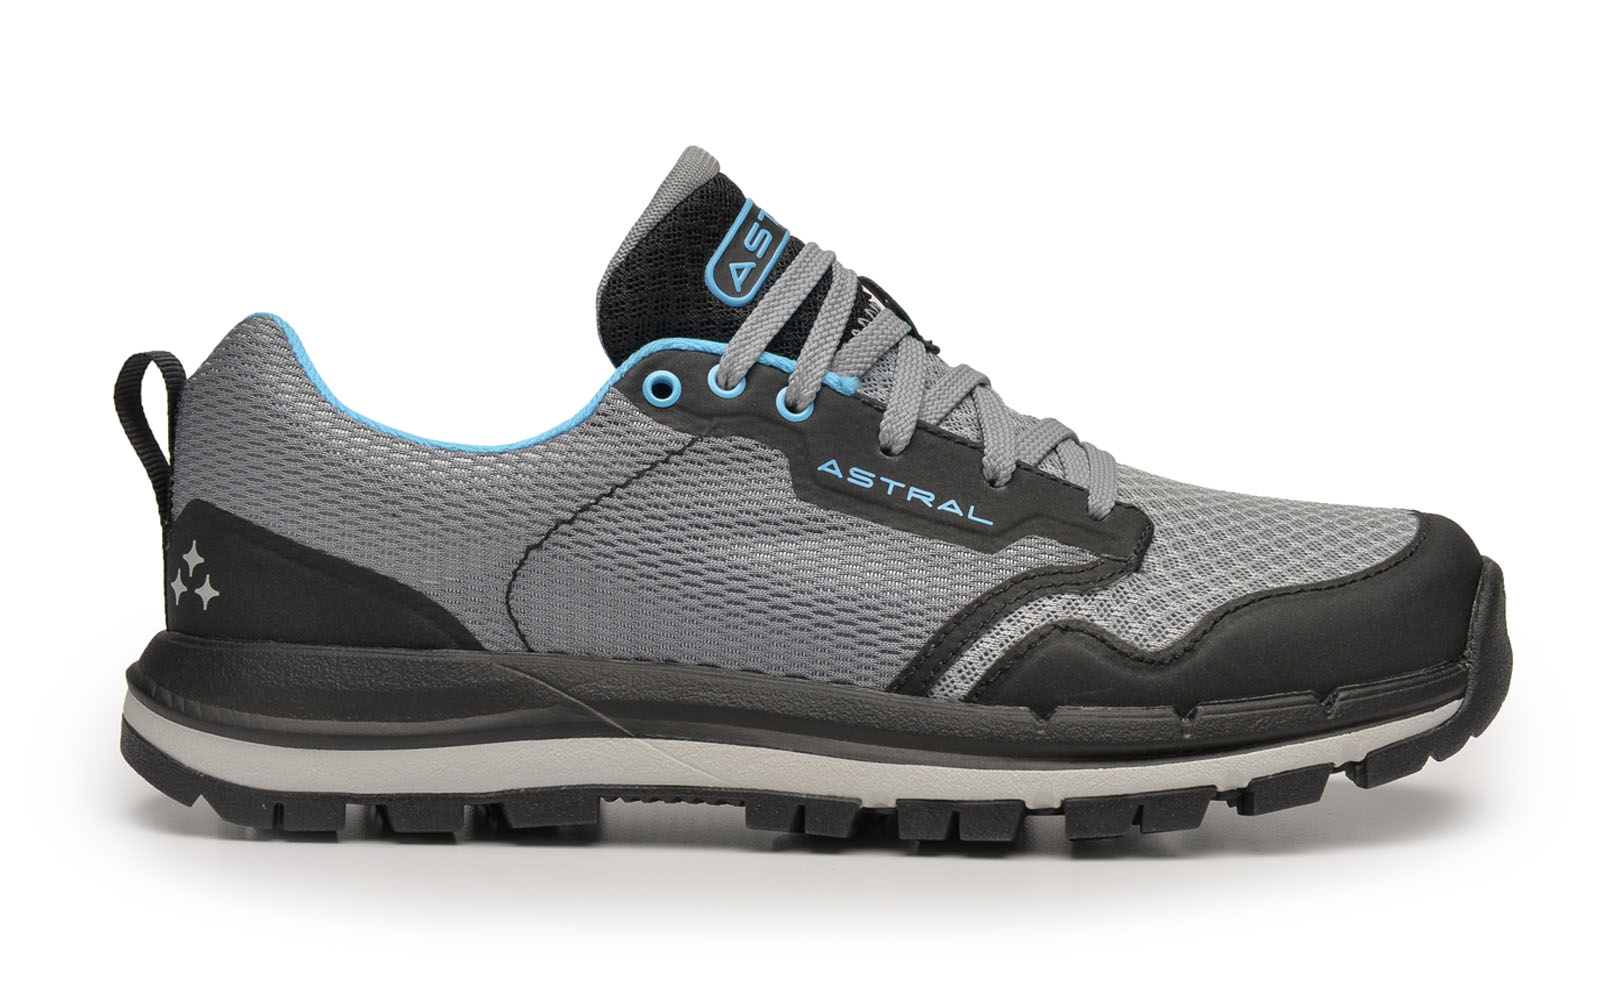 astral mesh hiking shoes